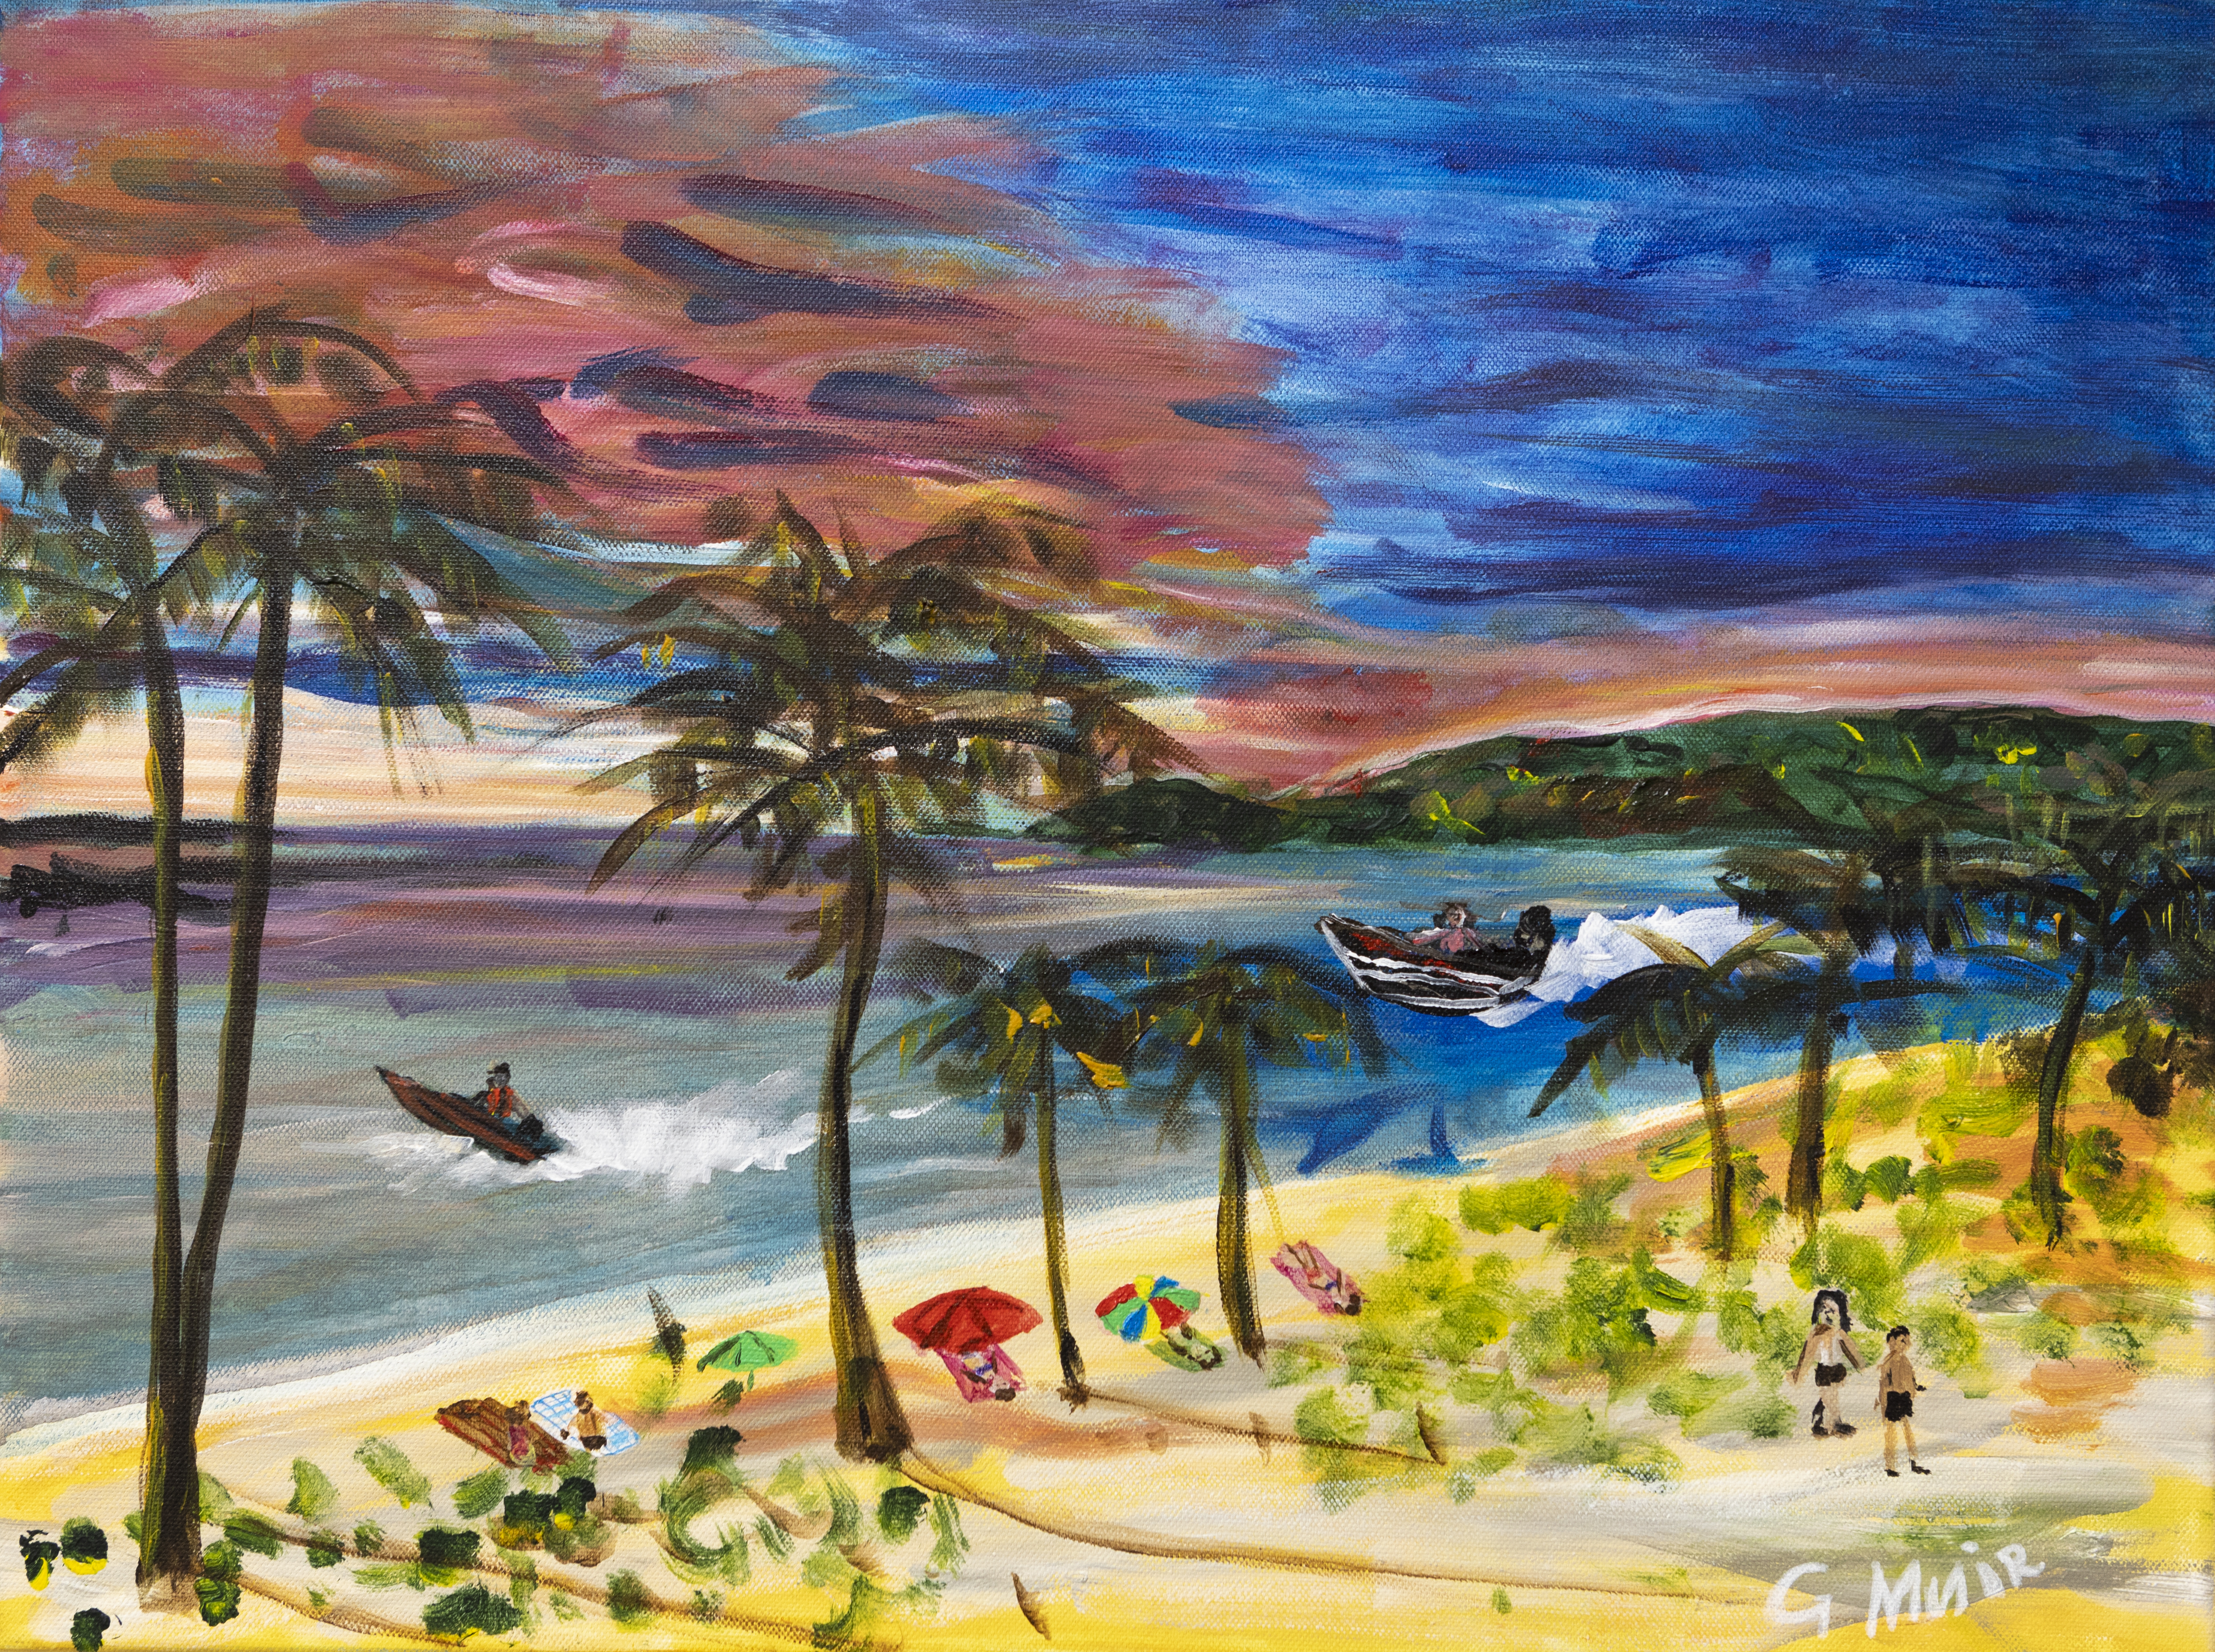 A beach scene with yellow sand with people sunbaking. Boats glide through the water and palm trees line the shore.